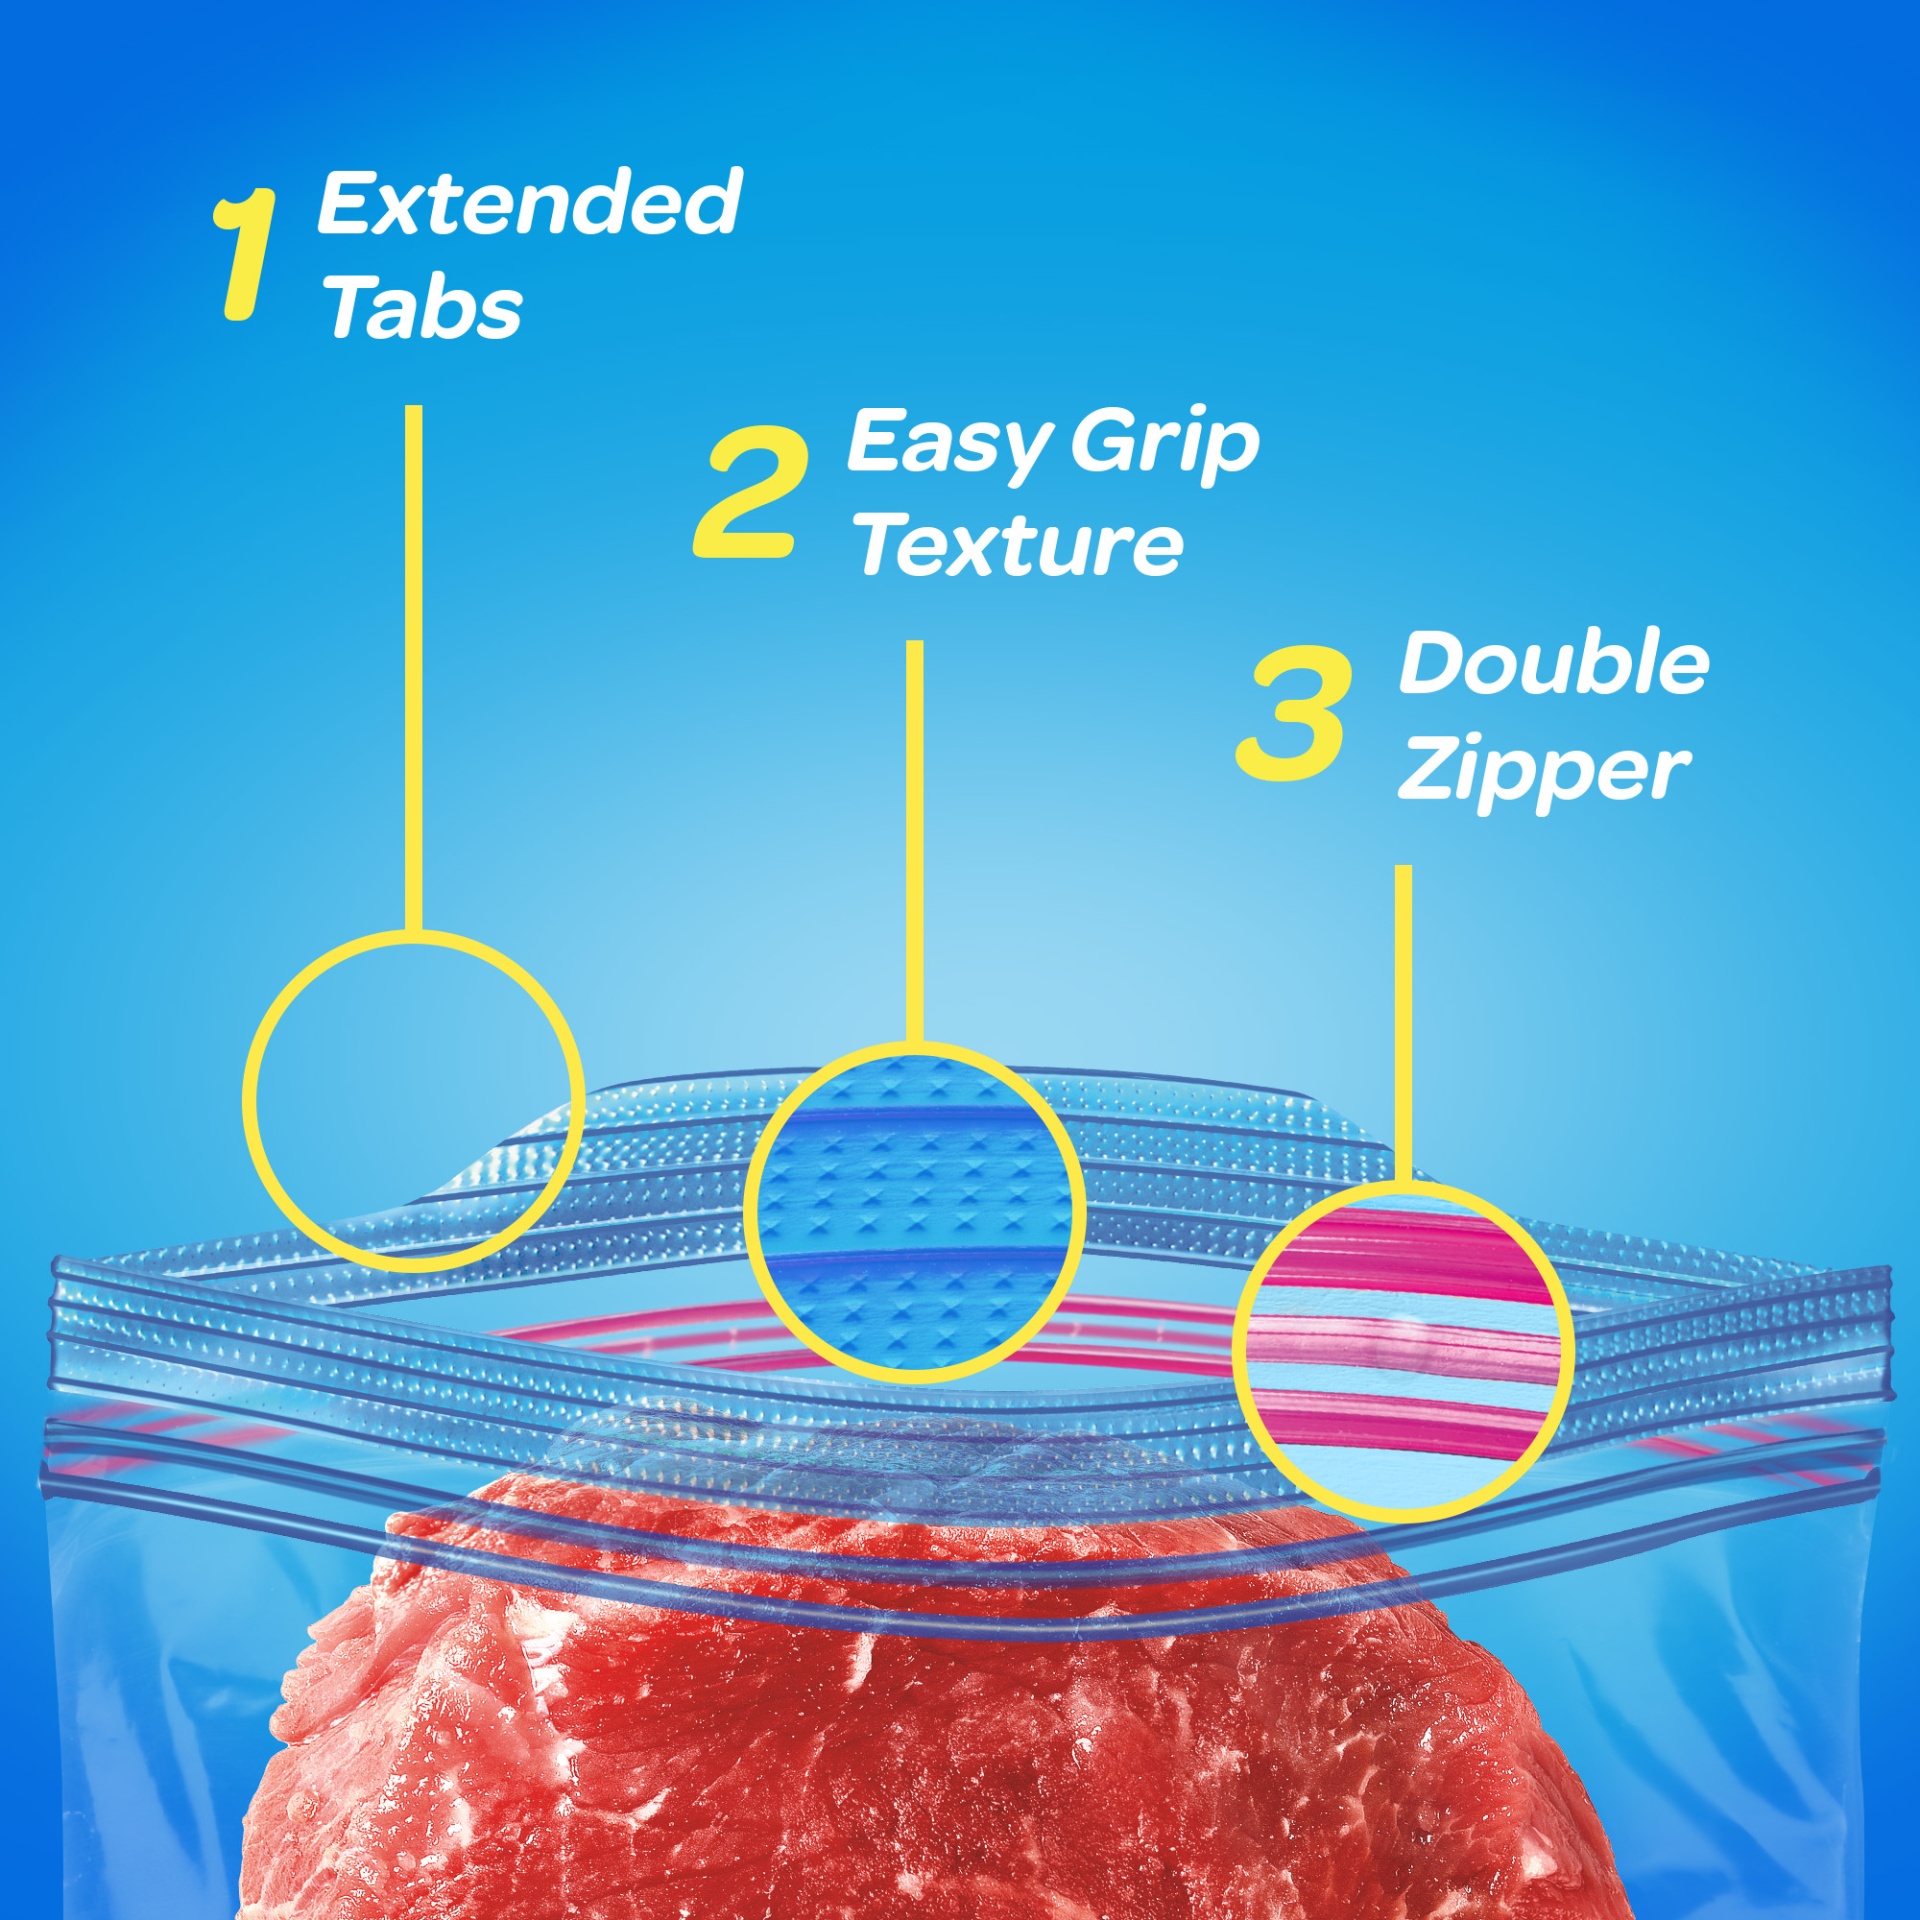 slide 4 of 7, Ziploc Brand Freezer Bags with New Stay Open Design, Quart, 19, Patented Stand-up Bottom, Easy to Fill Freezer Bag, Unloc a Free Set of Hands in the Kitchen, Microwave Safe, BPA Free, 19 ct